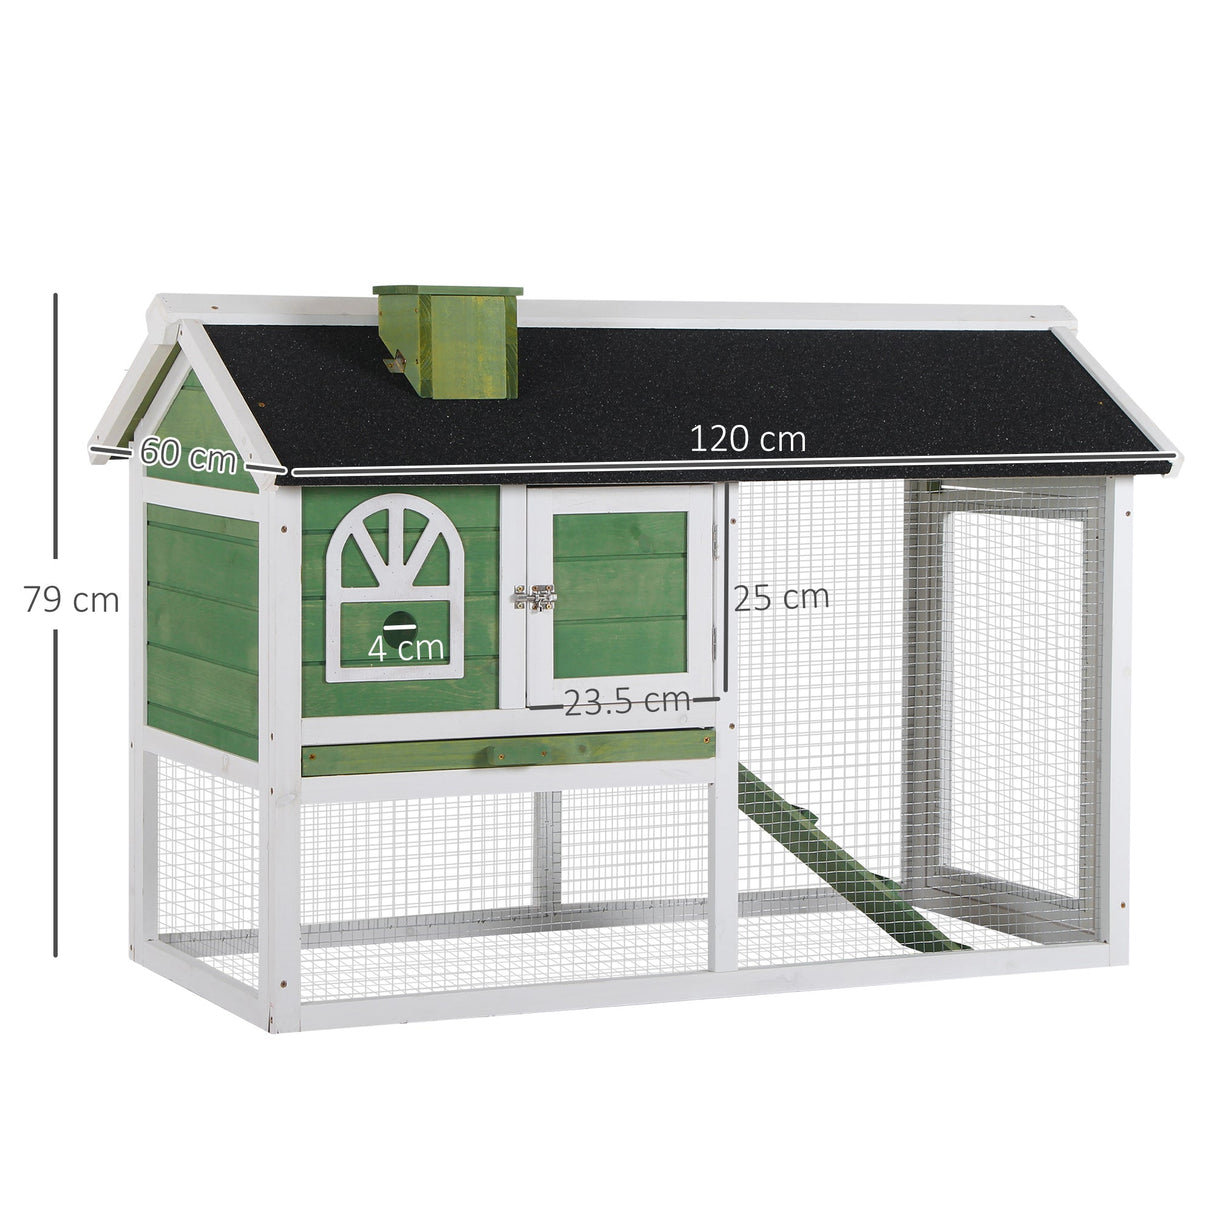 Two Tiers Rabbit Hutch and Run Wooden Guinea Pig Hutch Outdoor with Sliding Tray, Ramp and Water-resistant Roof, for 2-4 Rabbits, PawHut, Green